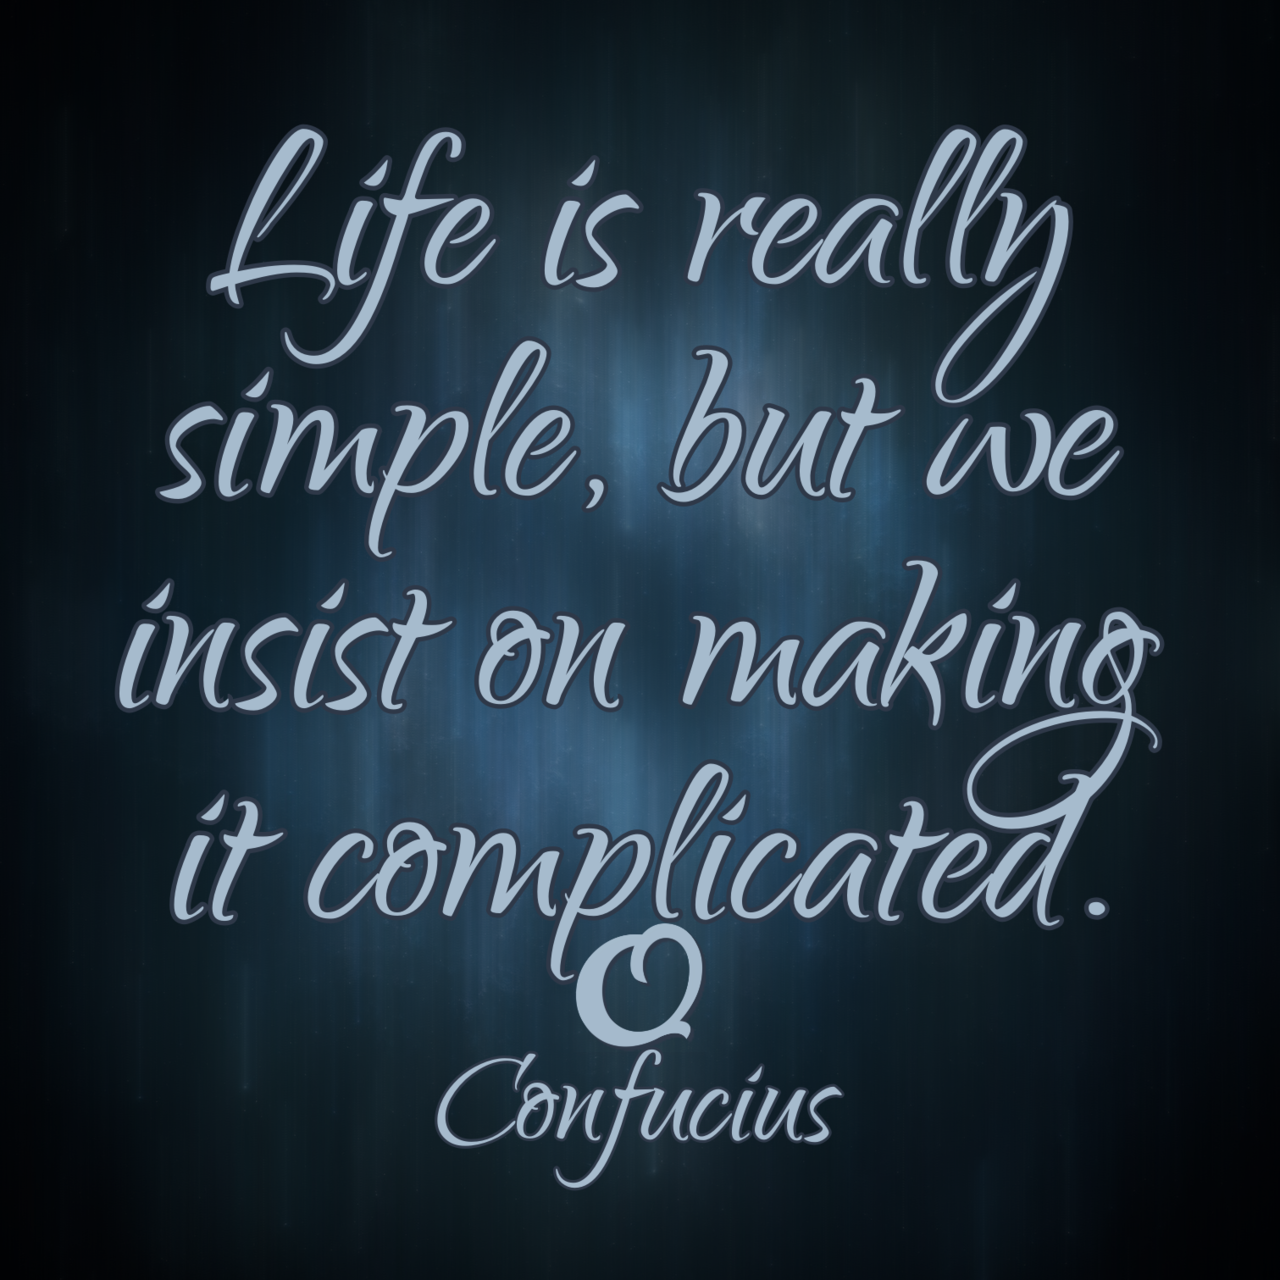 Confucius “Life is really simple, but we insist on making it complicated.”